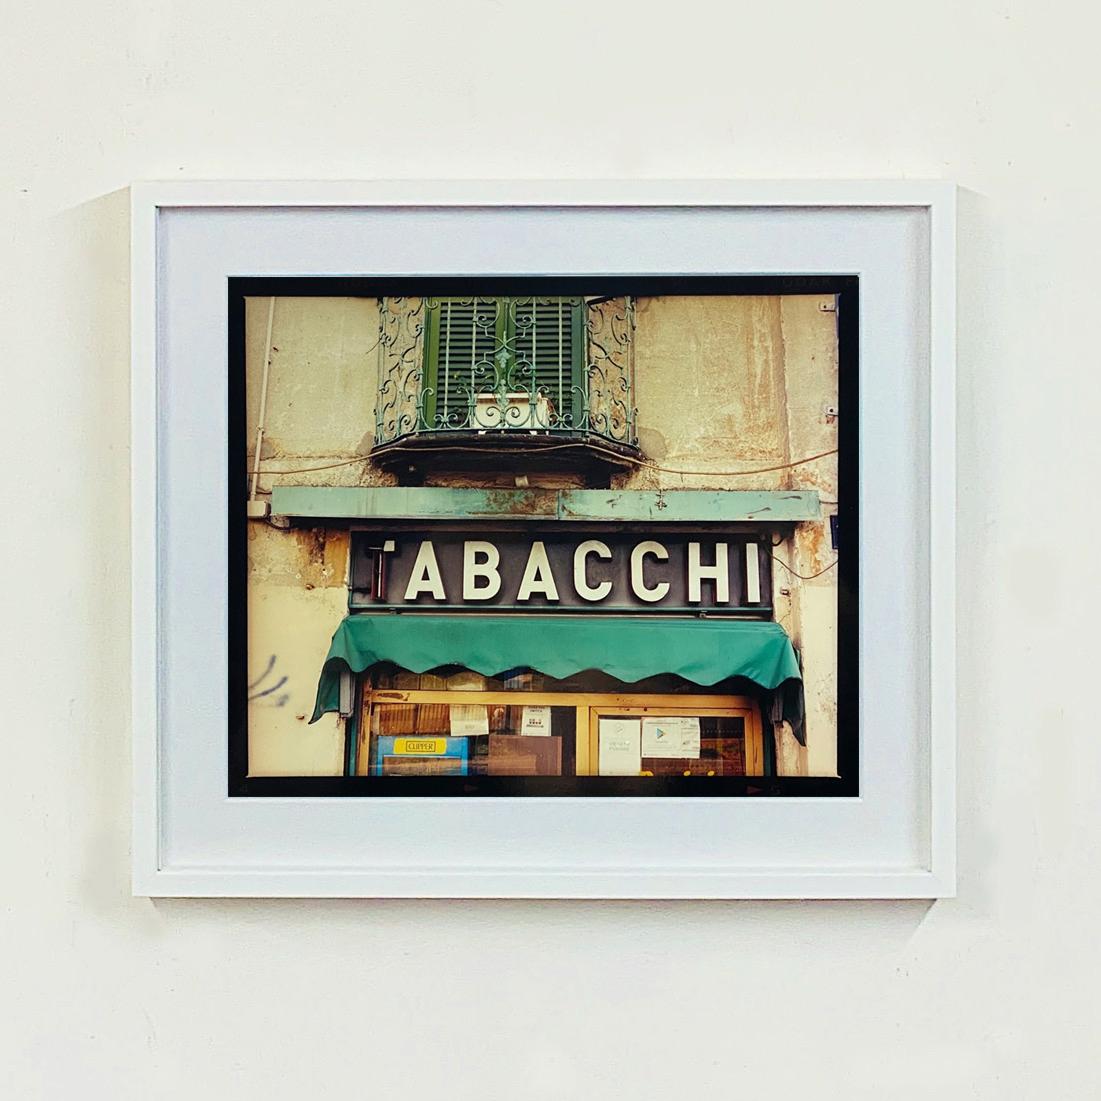 TABACCHI Sign, Milan - Architectural Color Photography For Sale 6